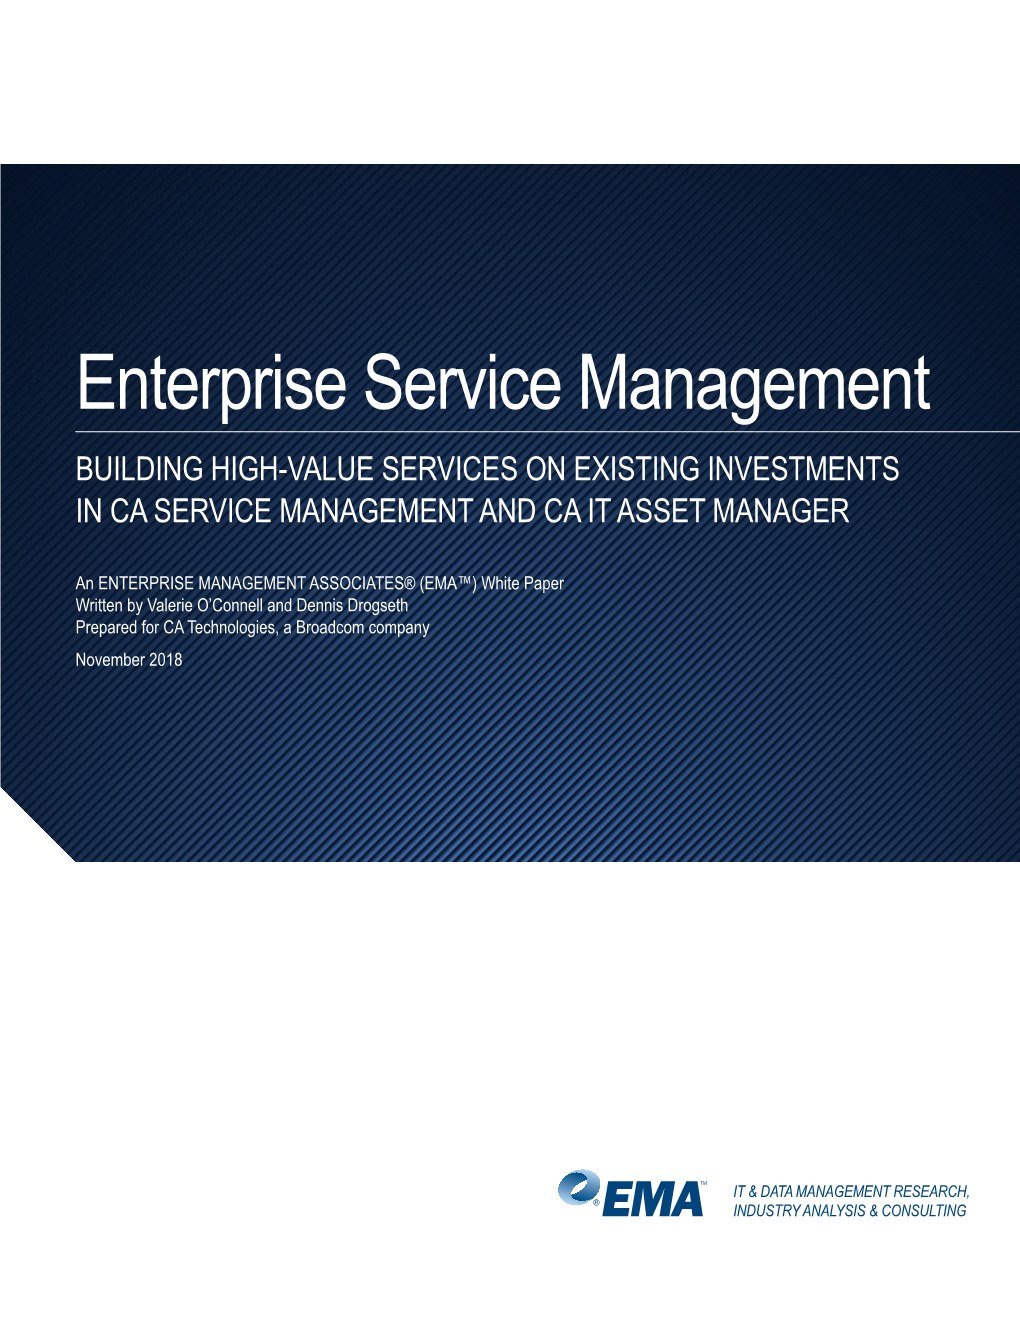 Enterprise Service Management BUILDING HIGH-VALUE SERVICES on EXISTING INVESTMENTS in CA SERVICE MANAGEMENT and CA IT ASSET MANAGER